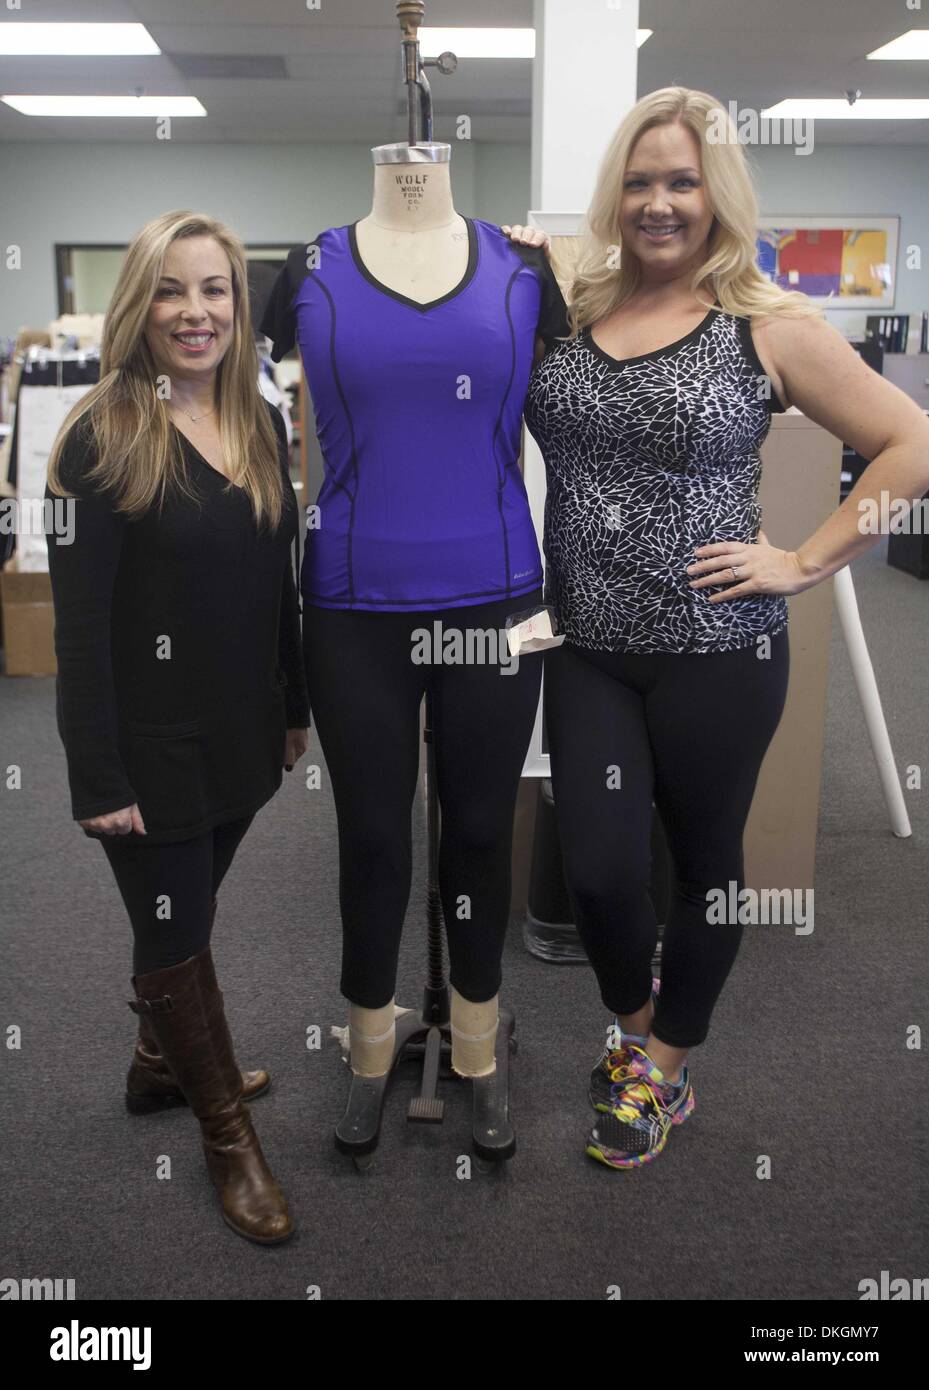 Los Angeles, California, USA. 25th Nov, 2013. Stacy Goldstein of Lola Getts  Active, poses with a plus-sized models. Goldstein is making yoga pants and  other sports apparel for bigger women. © Ringo